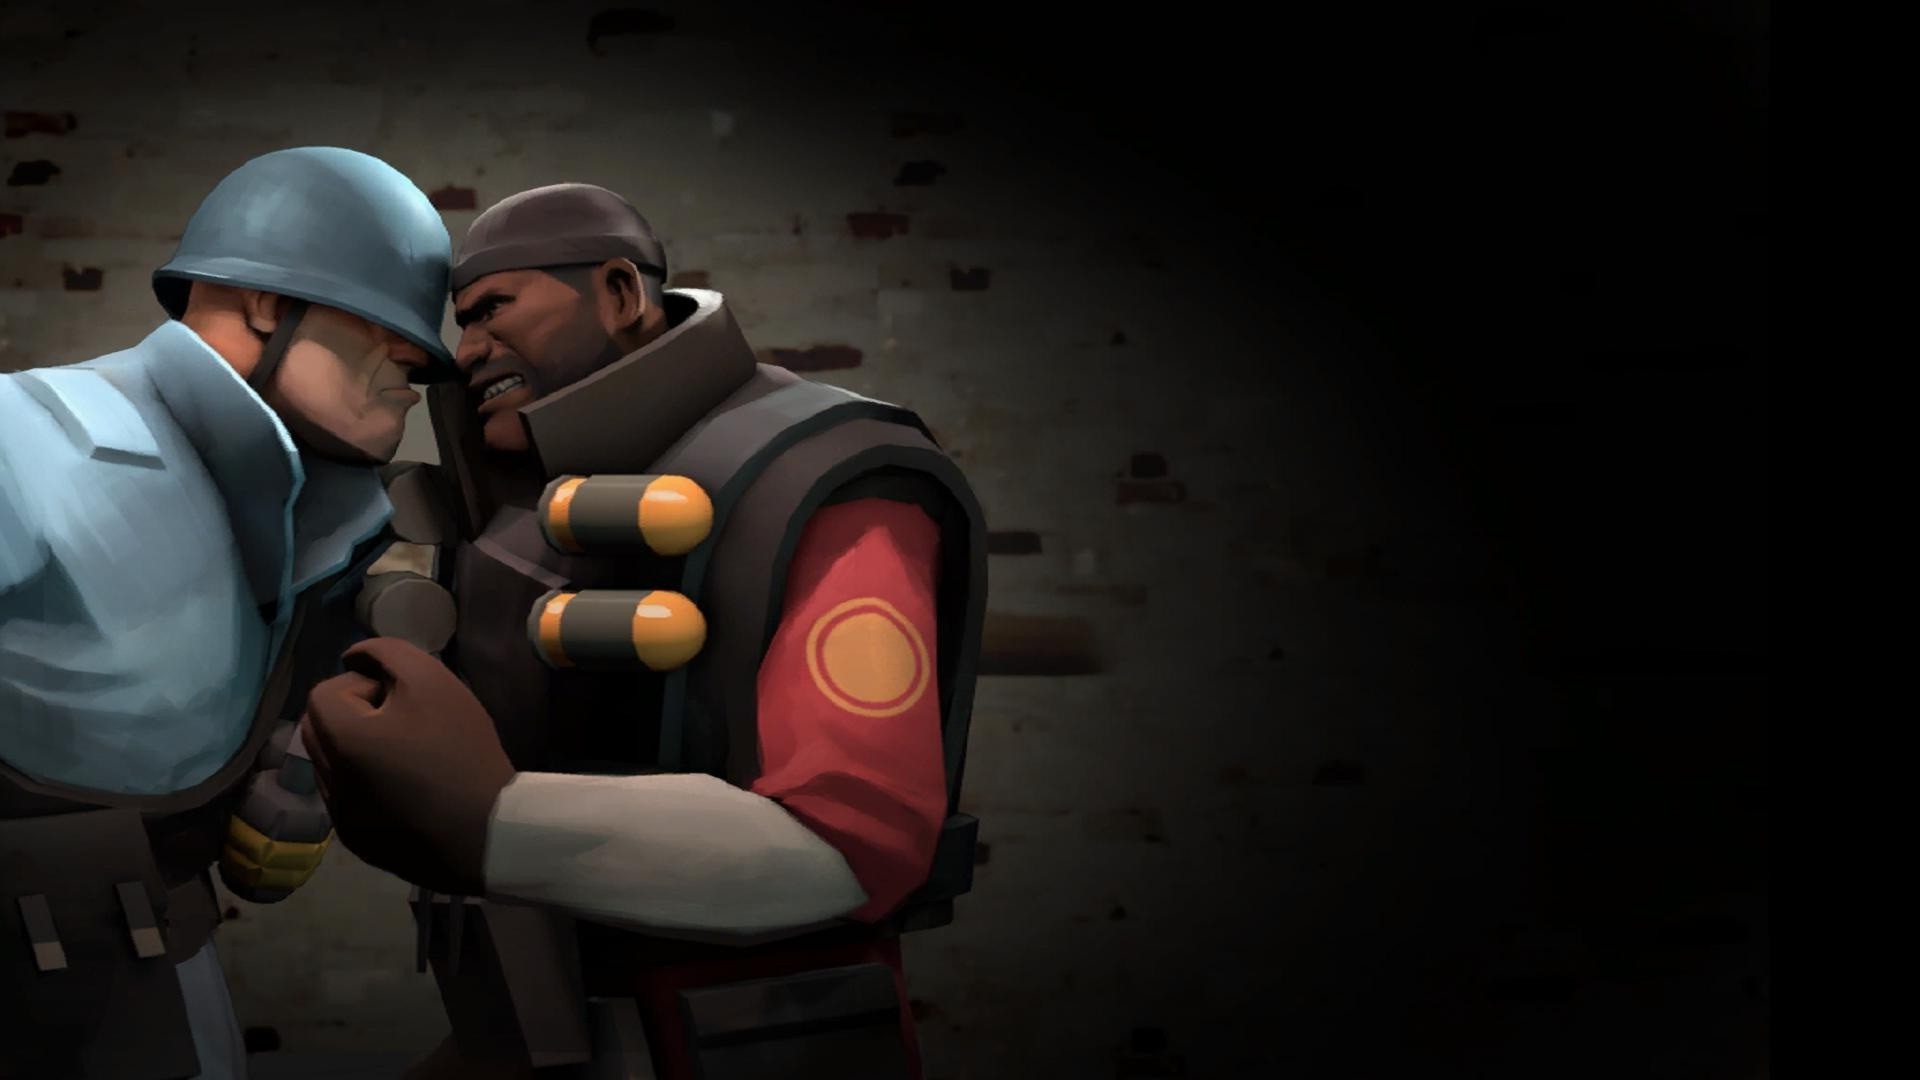 5120x1440p 329 team fortress 2 wallpapers